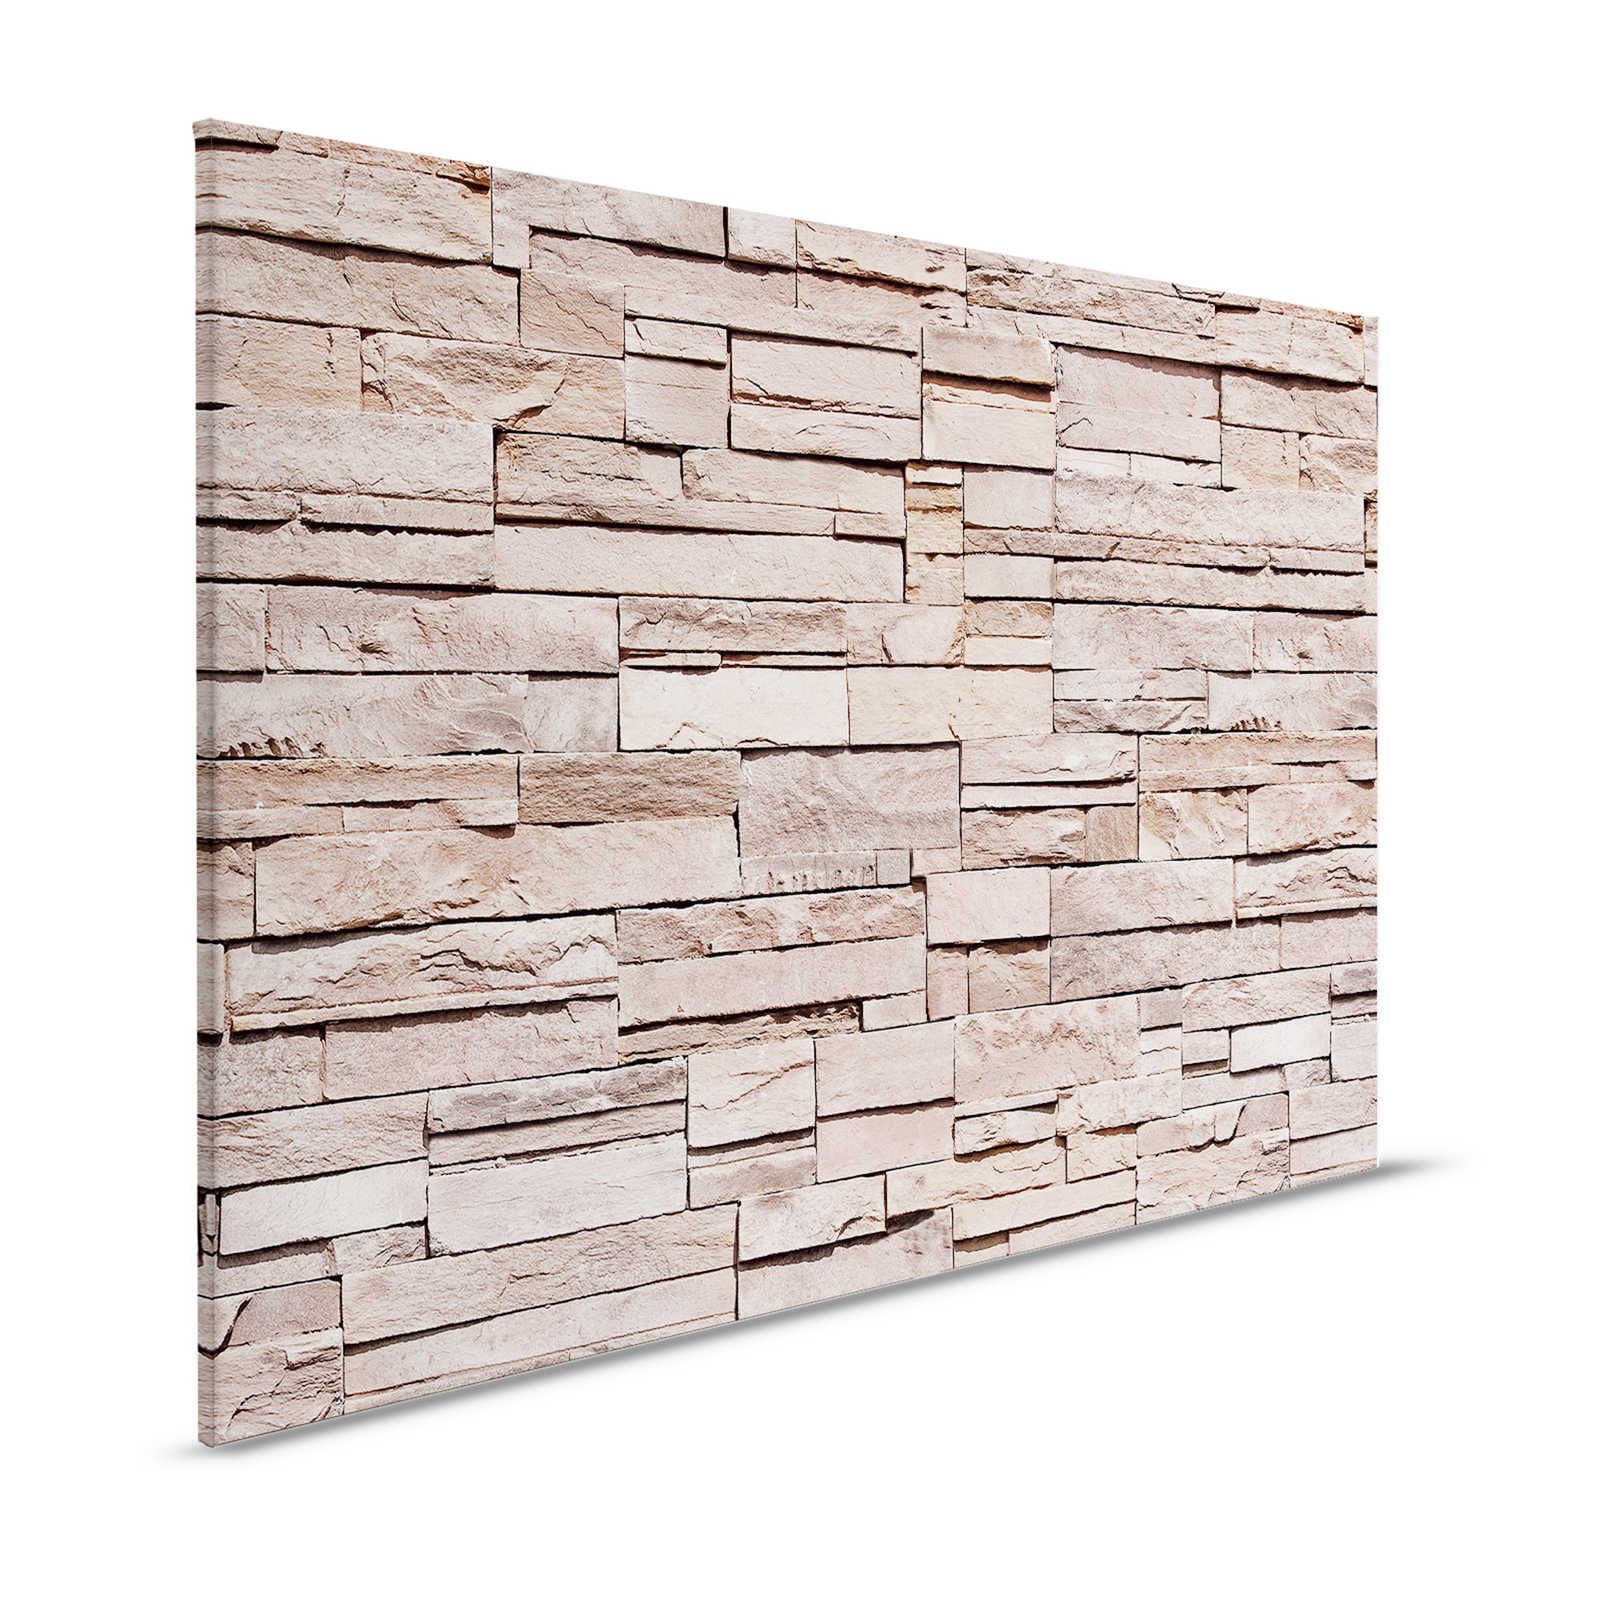 Canvas painting 3D stone look, light brown dry stone wall - 1.20 m x 0.80 m
